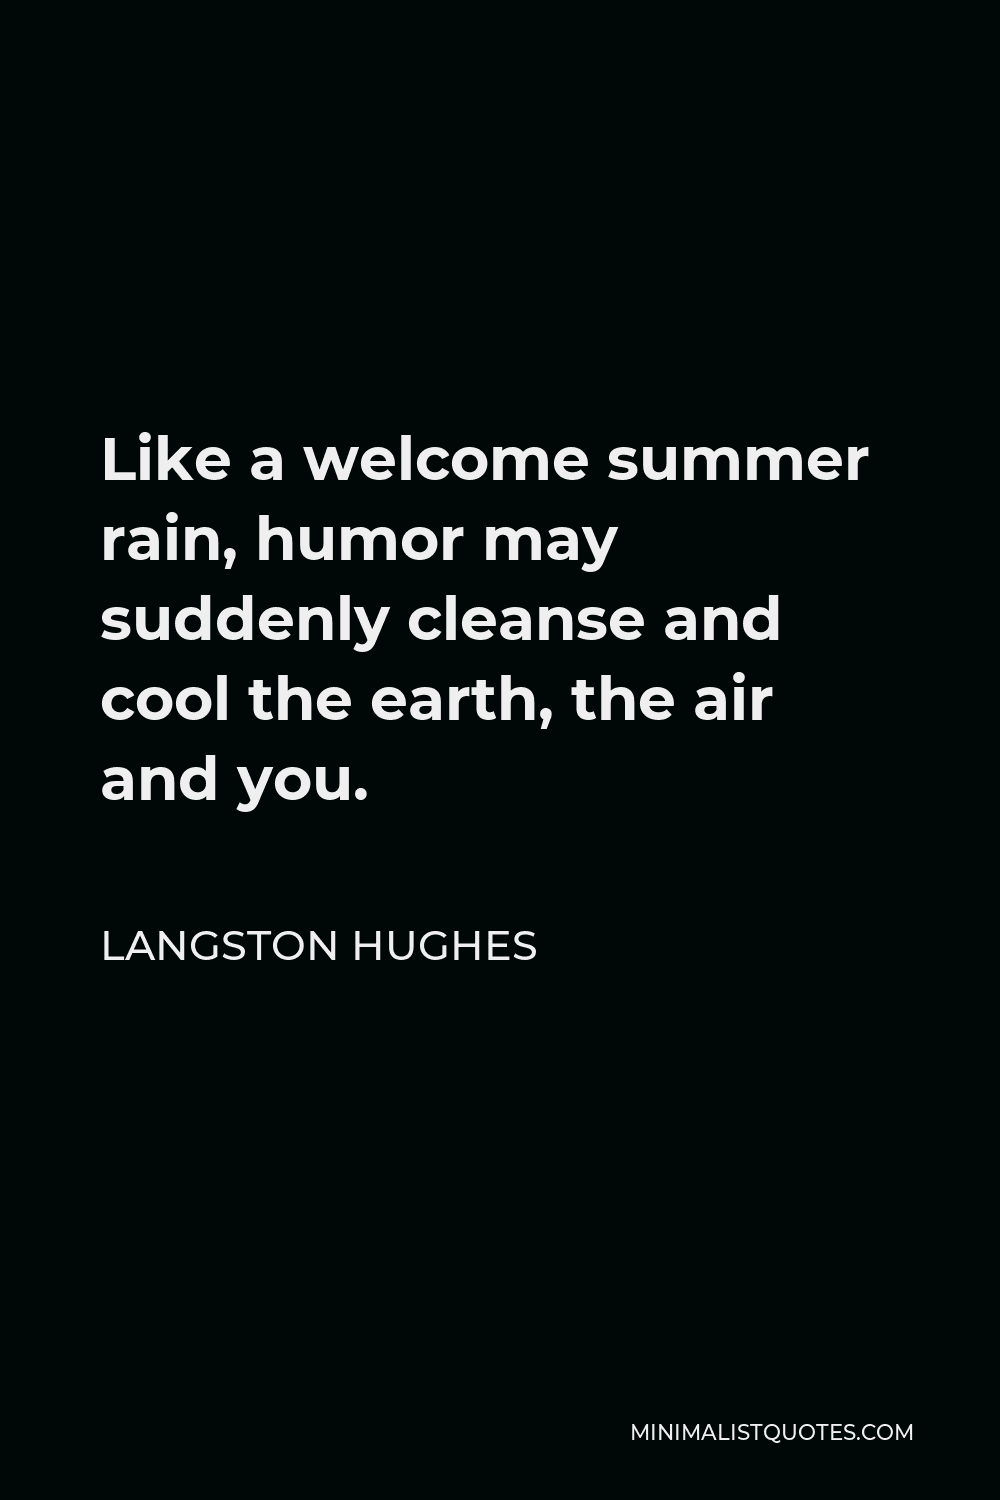 Langston Hughes Quote - Like a welcome summer rain, humor may suddenly cleanse and cool the earth, the air and you.